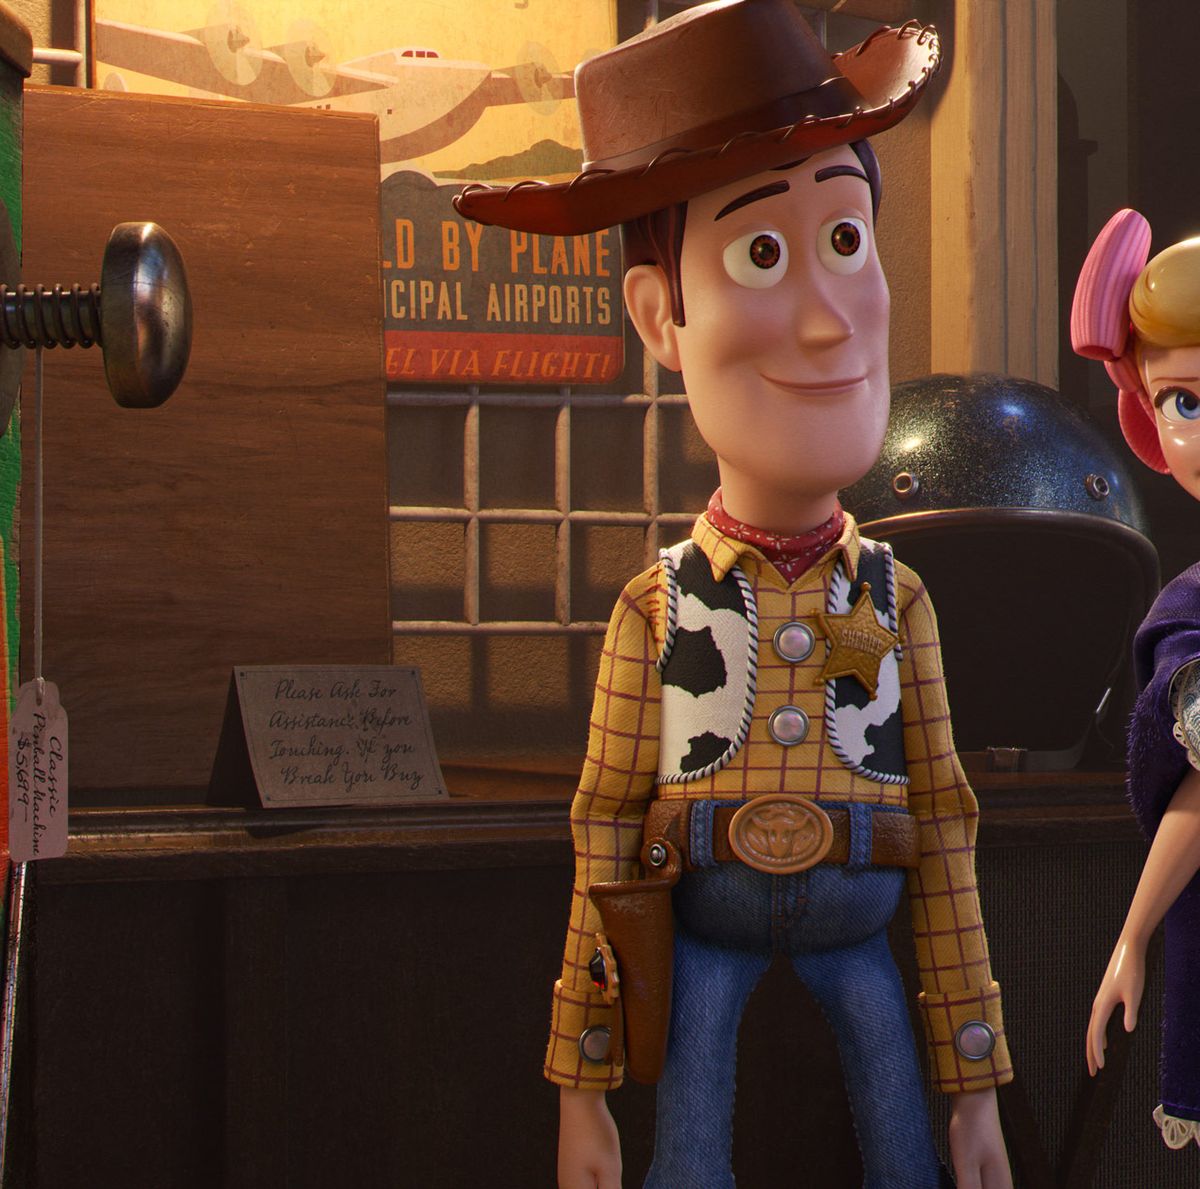 What 'Toy Story' character matches your zodiac sign?